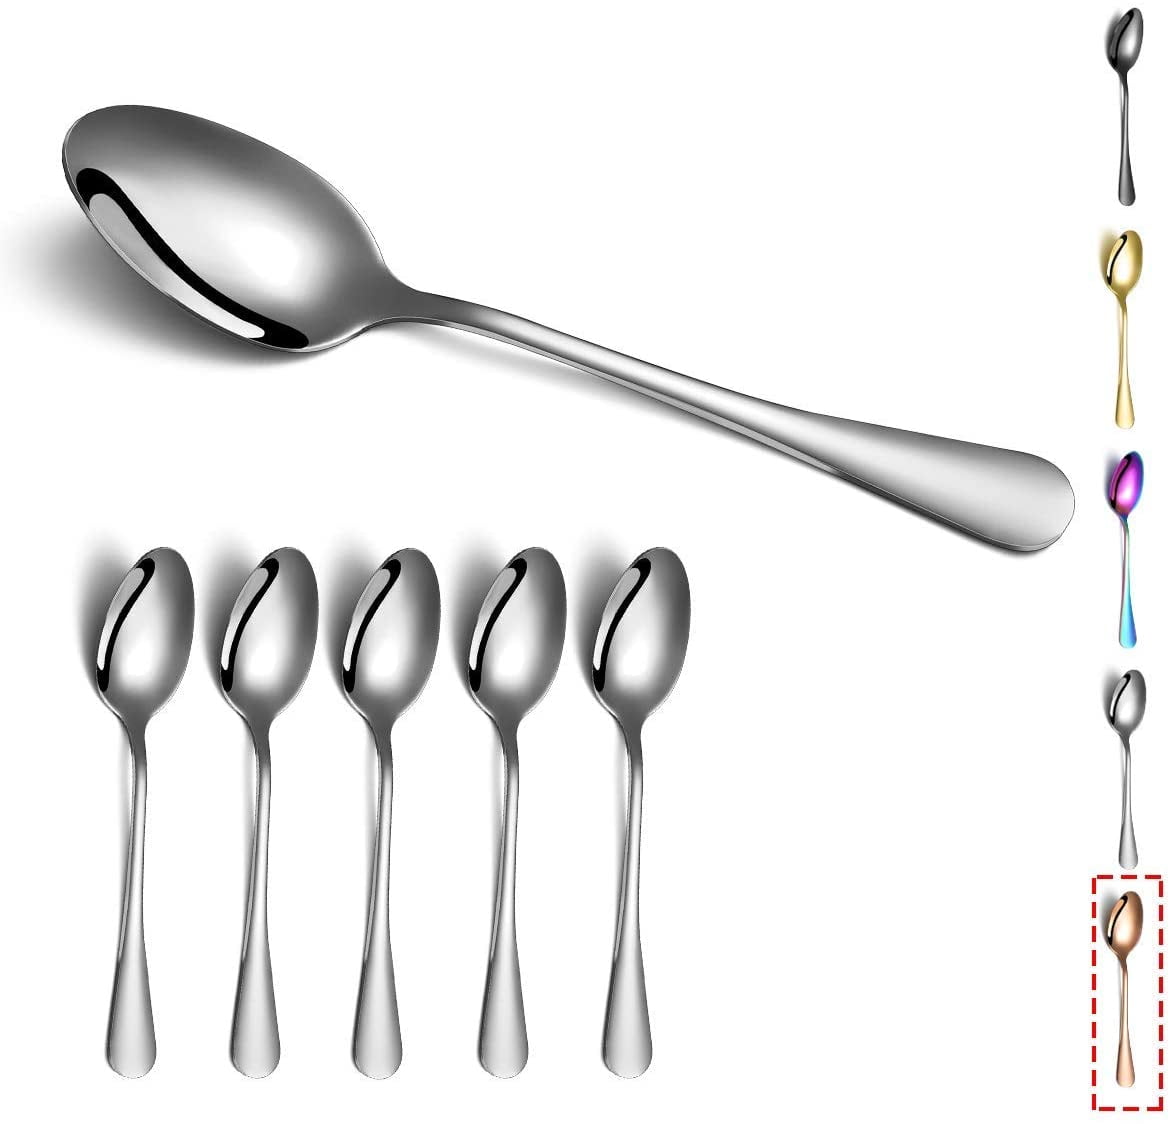 Copper Dinner Spoons 6 Piece Soup Spoons Kitchen or Restauran,Dishwasher Safe Spoons Silverware for Home 8.1'' Stainless Steel Tablespoons Dessert Spoons 